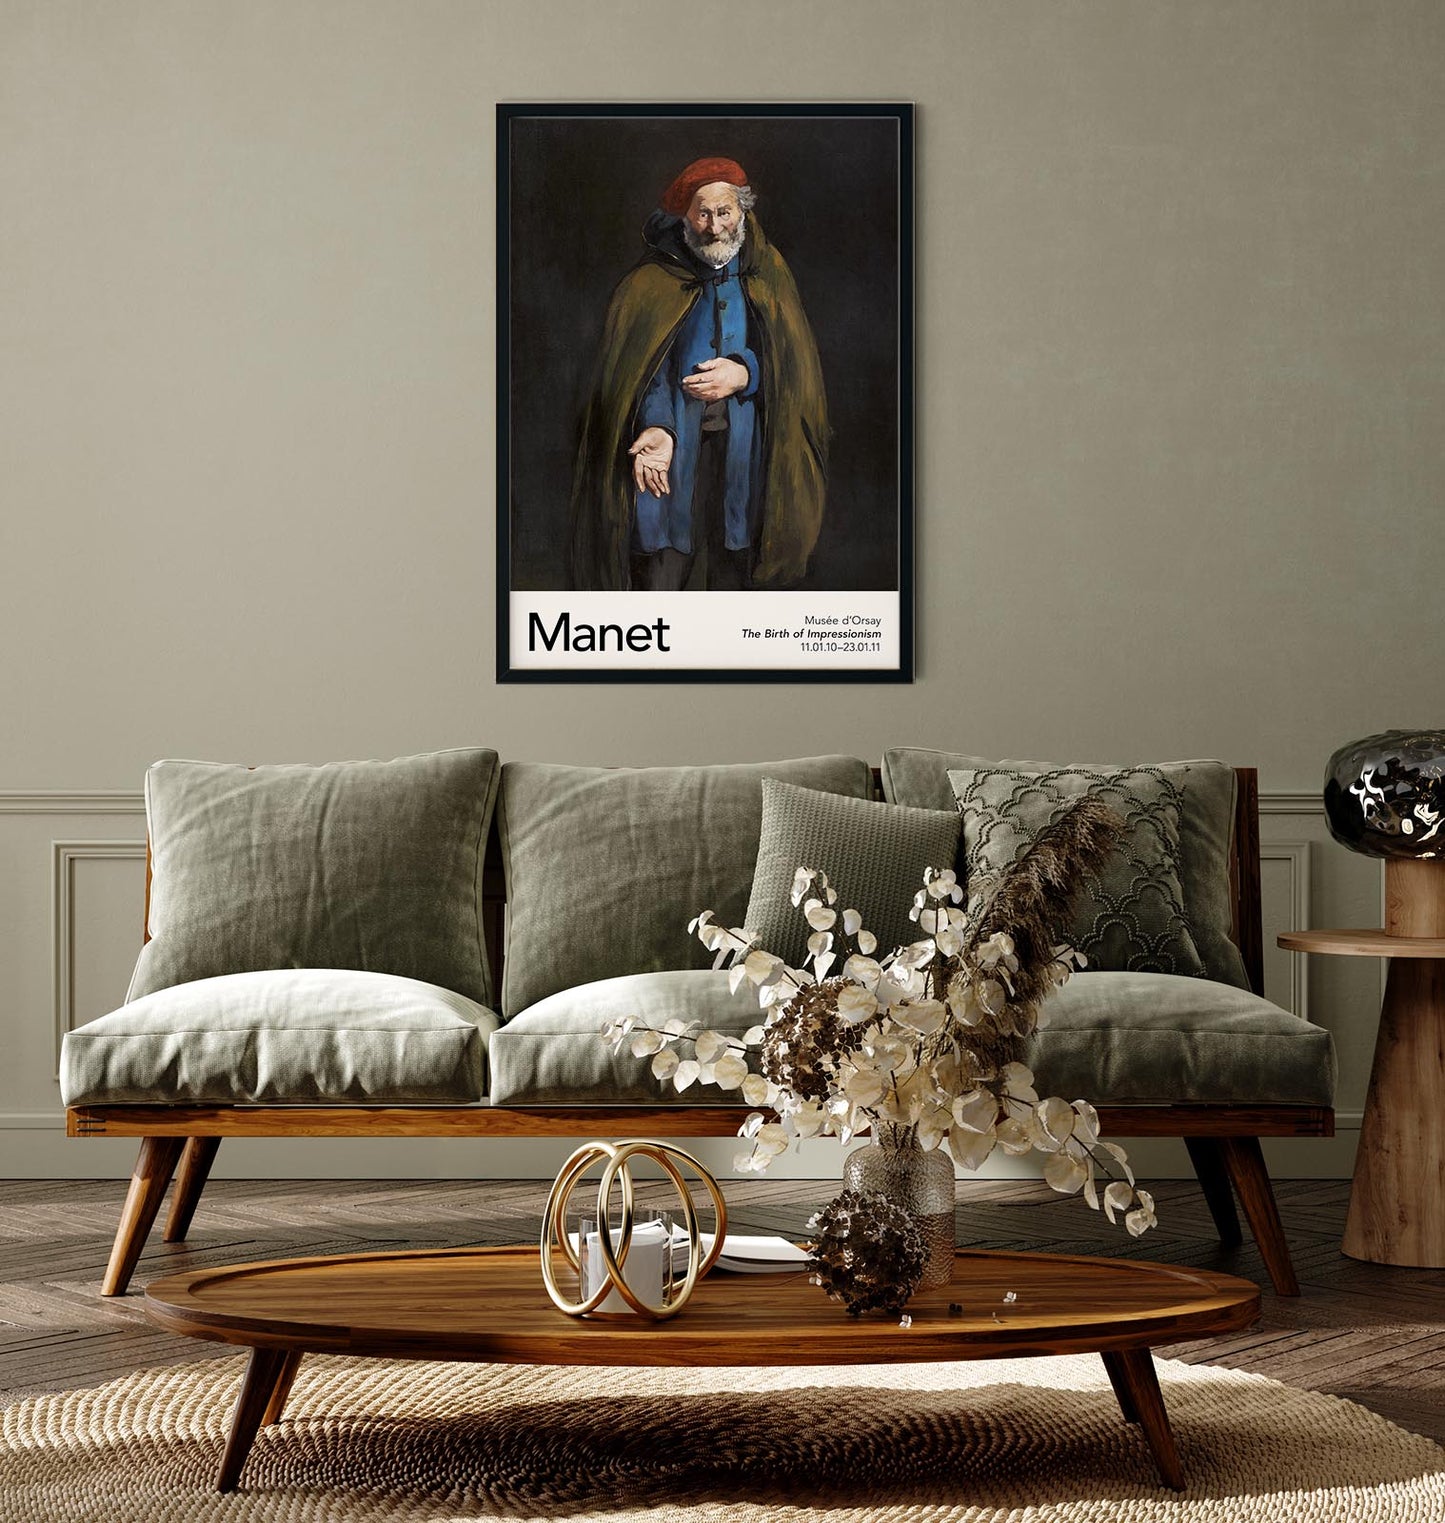 Beggar with a Duffle Coat by Manet Exhibition Poster